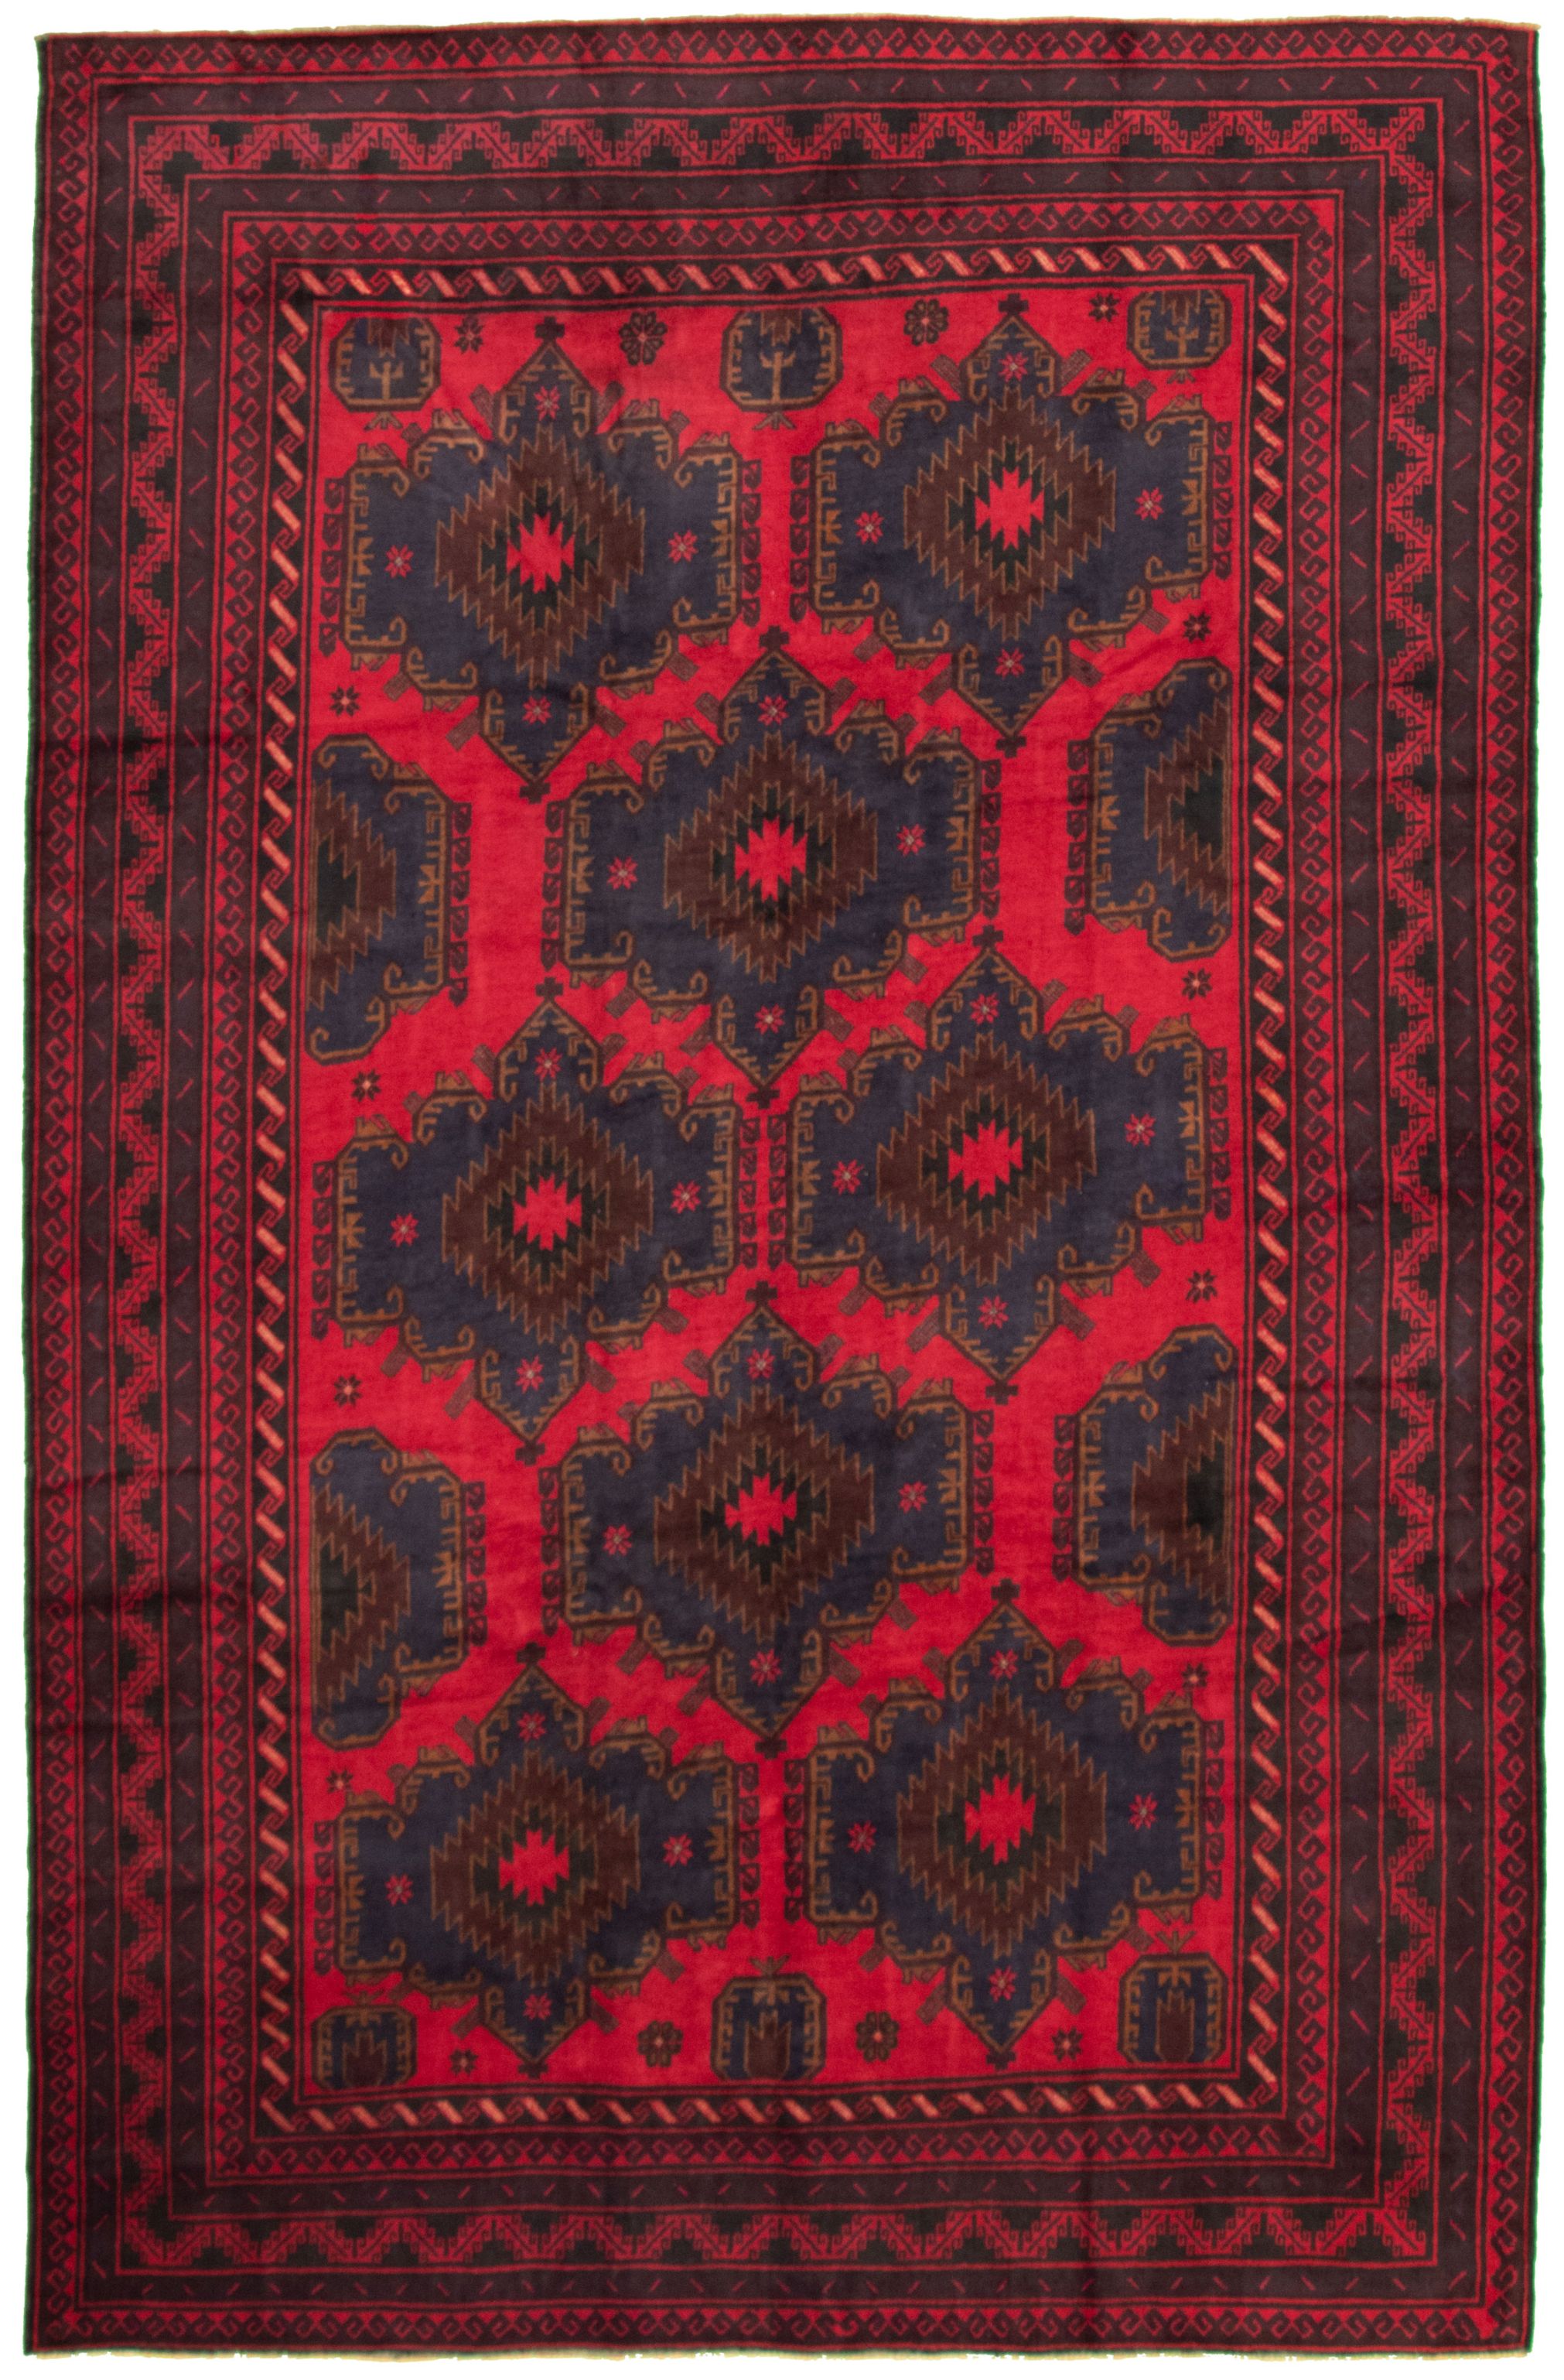 Hand-knotted Teimani Red Wool Rug 6'10" x 10'6" Size: 6'10" x 10'6"  